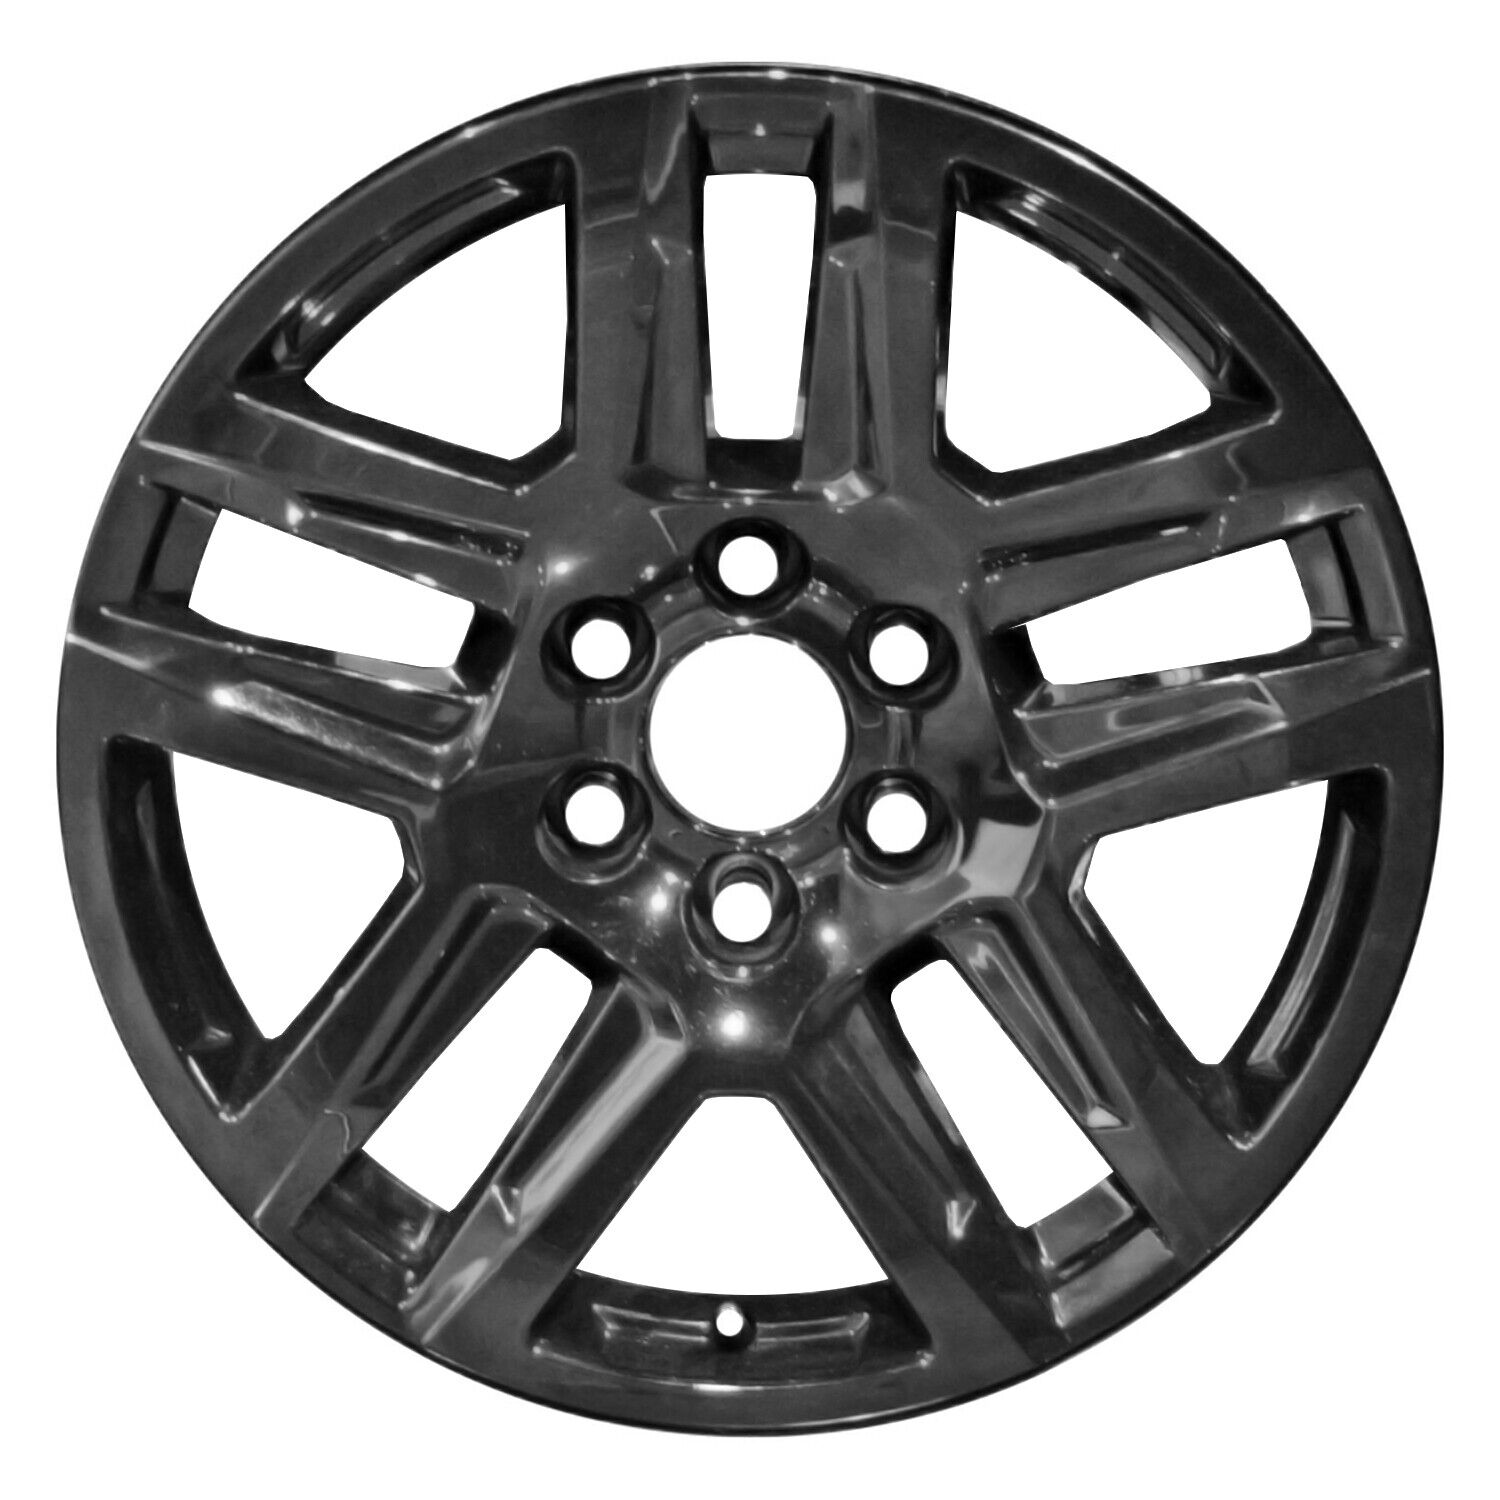 Reconditioned 20x9 Painted Gloss Black Wheel fits 560-05913